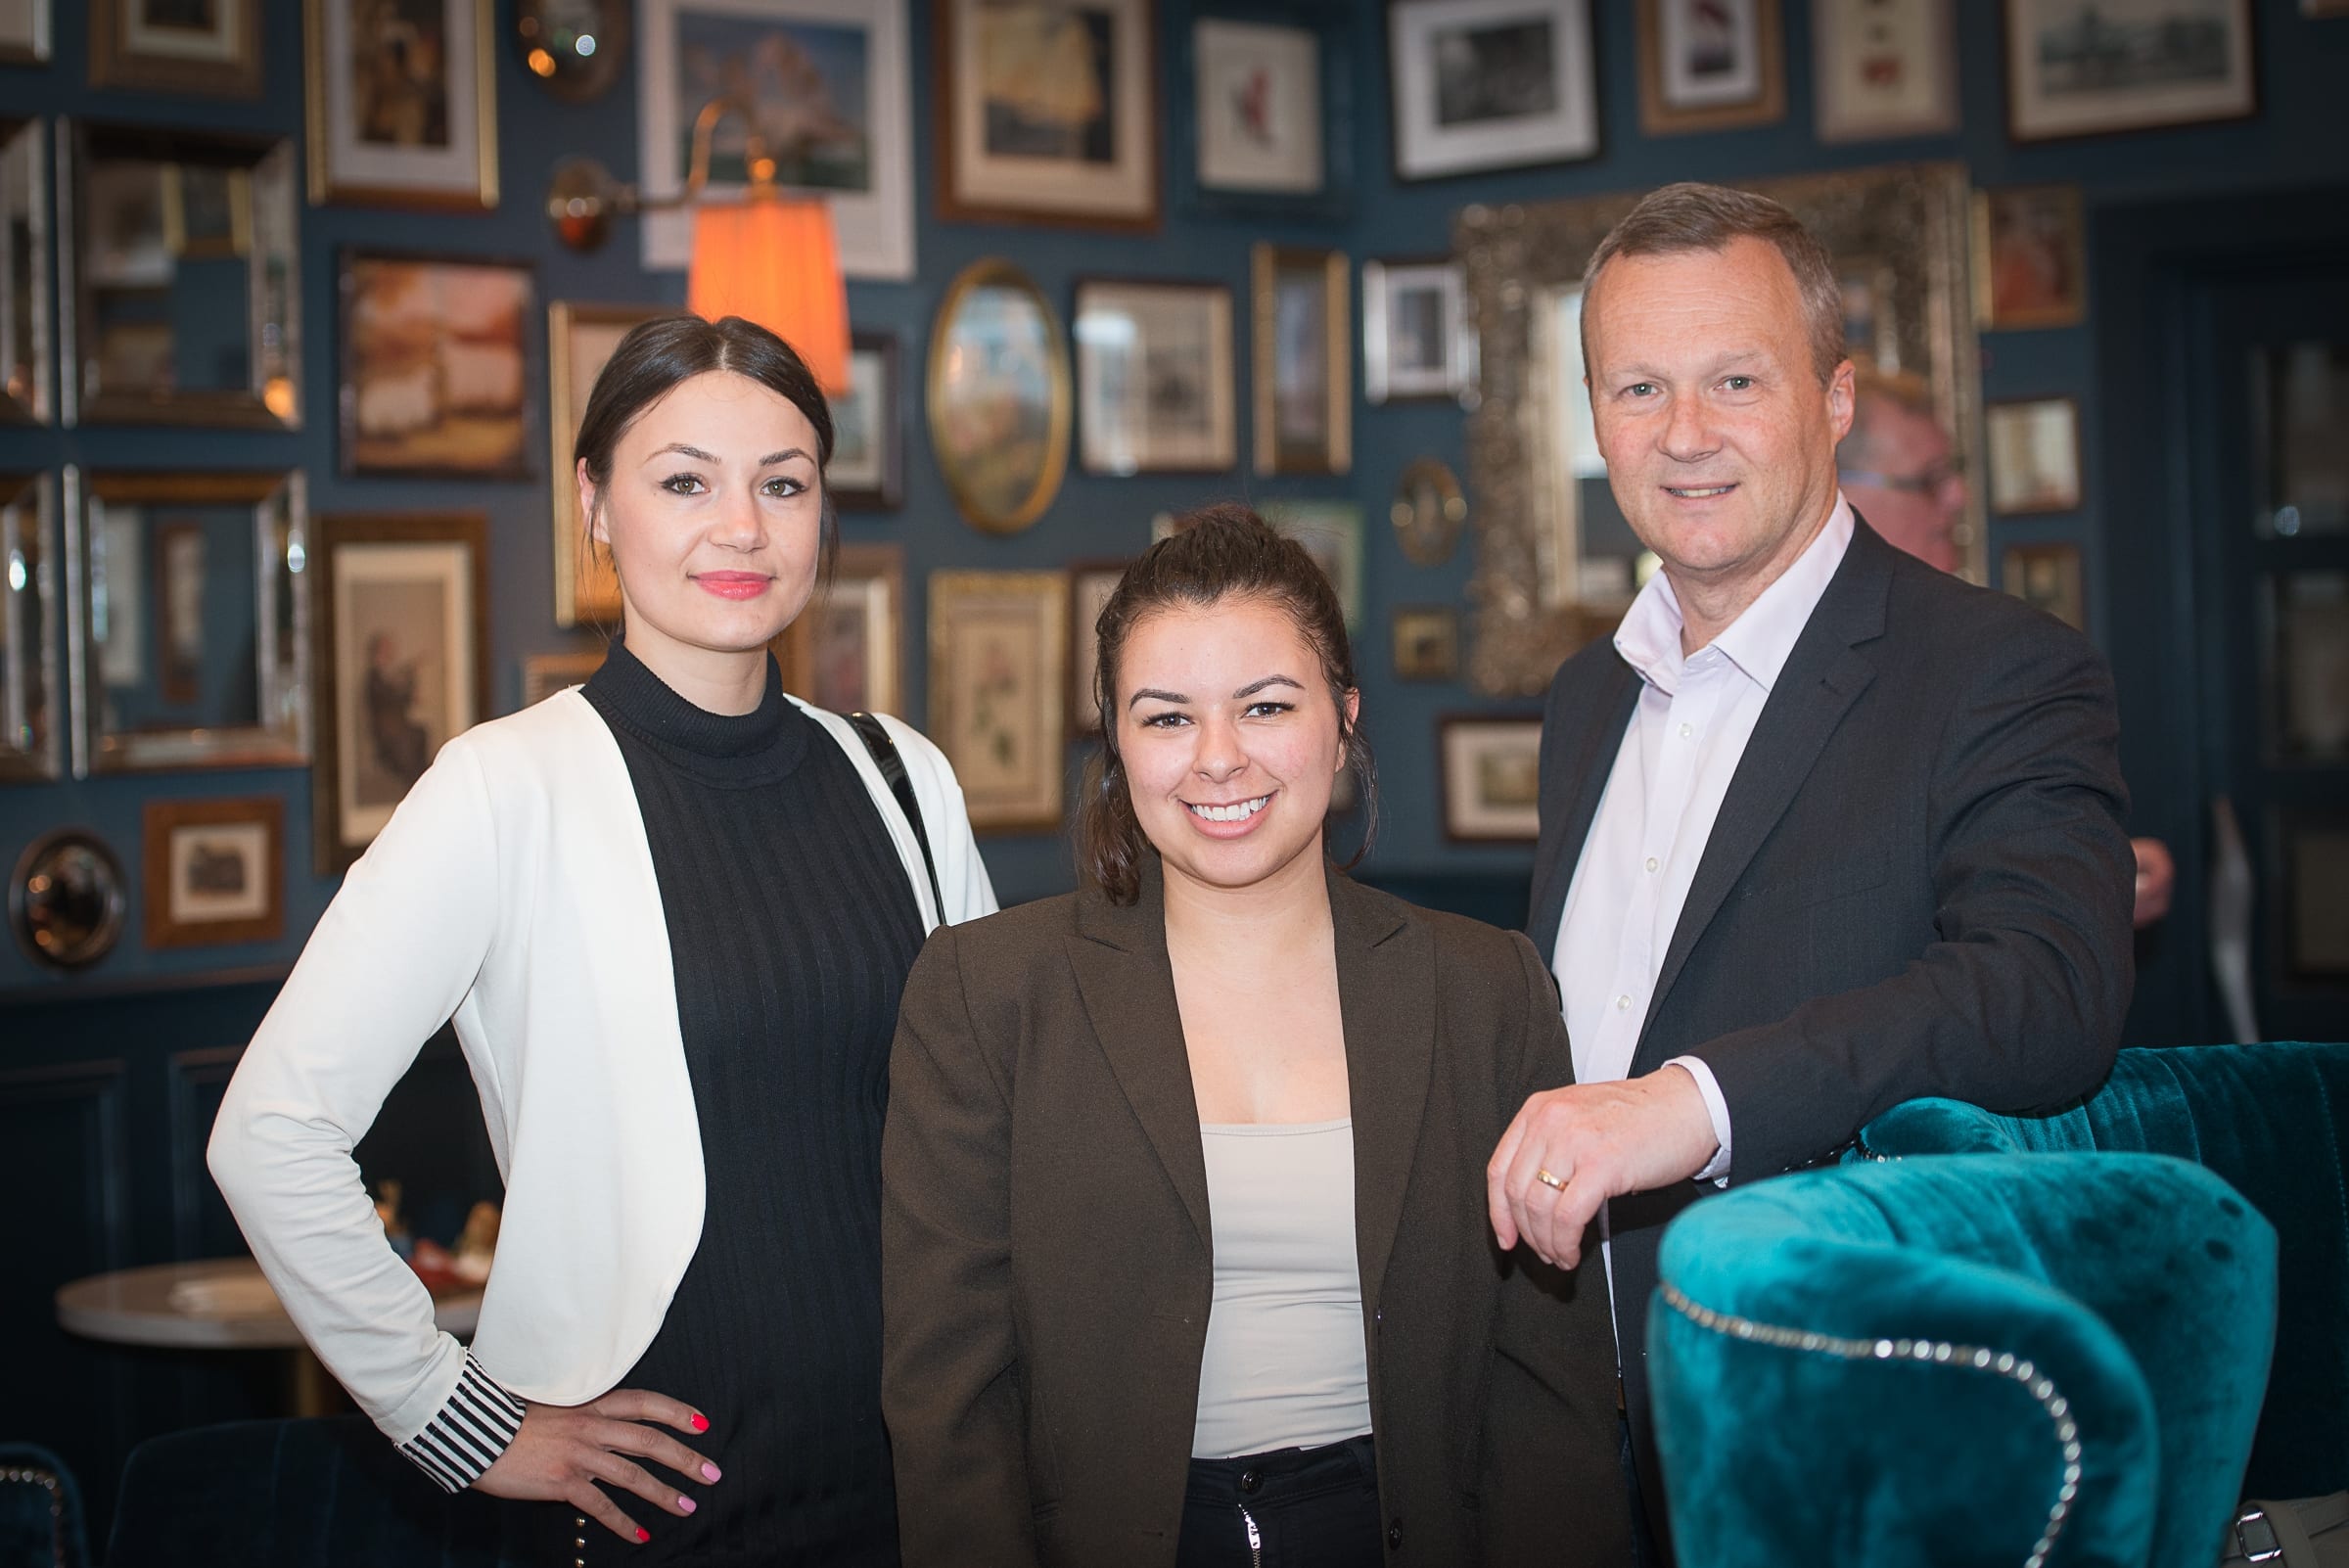 No repro fee: Networking with a Difference held in 101 O’Connell Street. Facilitated by Stephen Pitcher.  23-05-2019, From Left to Right: Hannah Lamasz - Effect Eyelash Academy , Jessica Silva - Jenssen Ireland, Paul Griffin - First Travel Compliance
Photo credit Shauna Kennedy